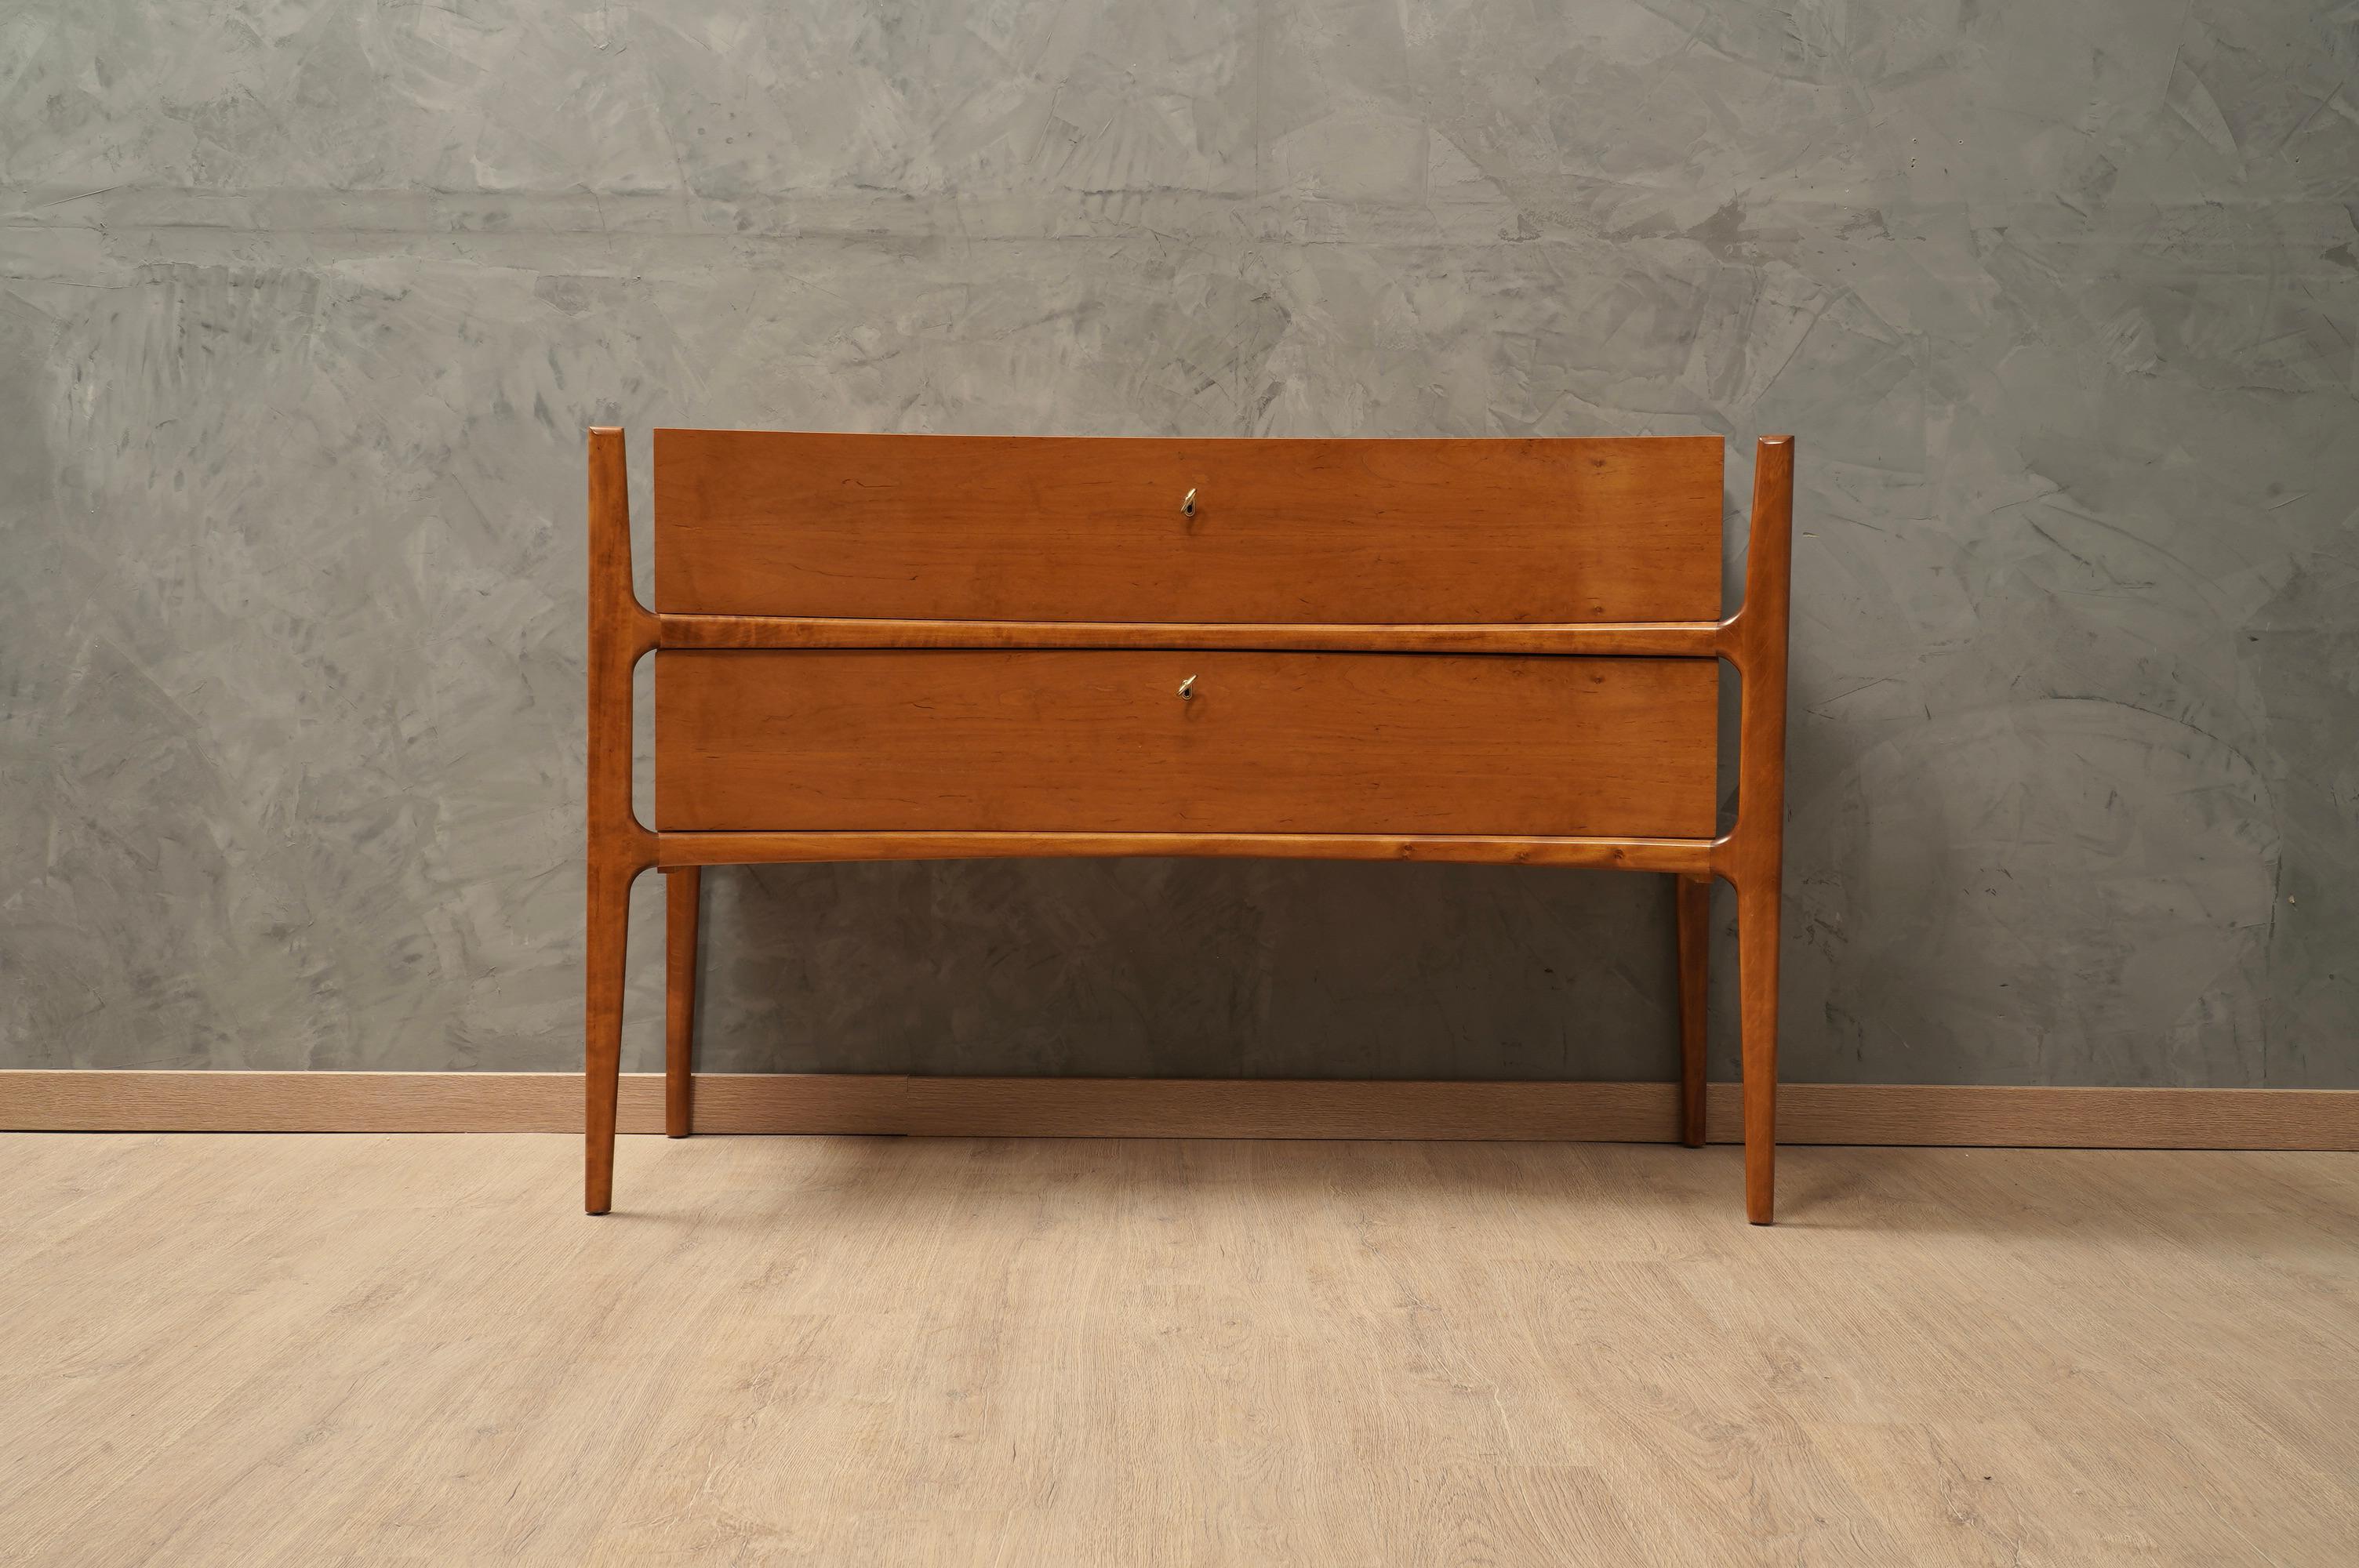 Beautiful commode in characteristic Italian style of Paolo Buffa, Vittorio Dassi and Osvaldo Borsani. Detailed shape of both the body and the legs.

Structure in cherry wood and stained beech wood, with two large curved drawers. The top is an